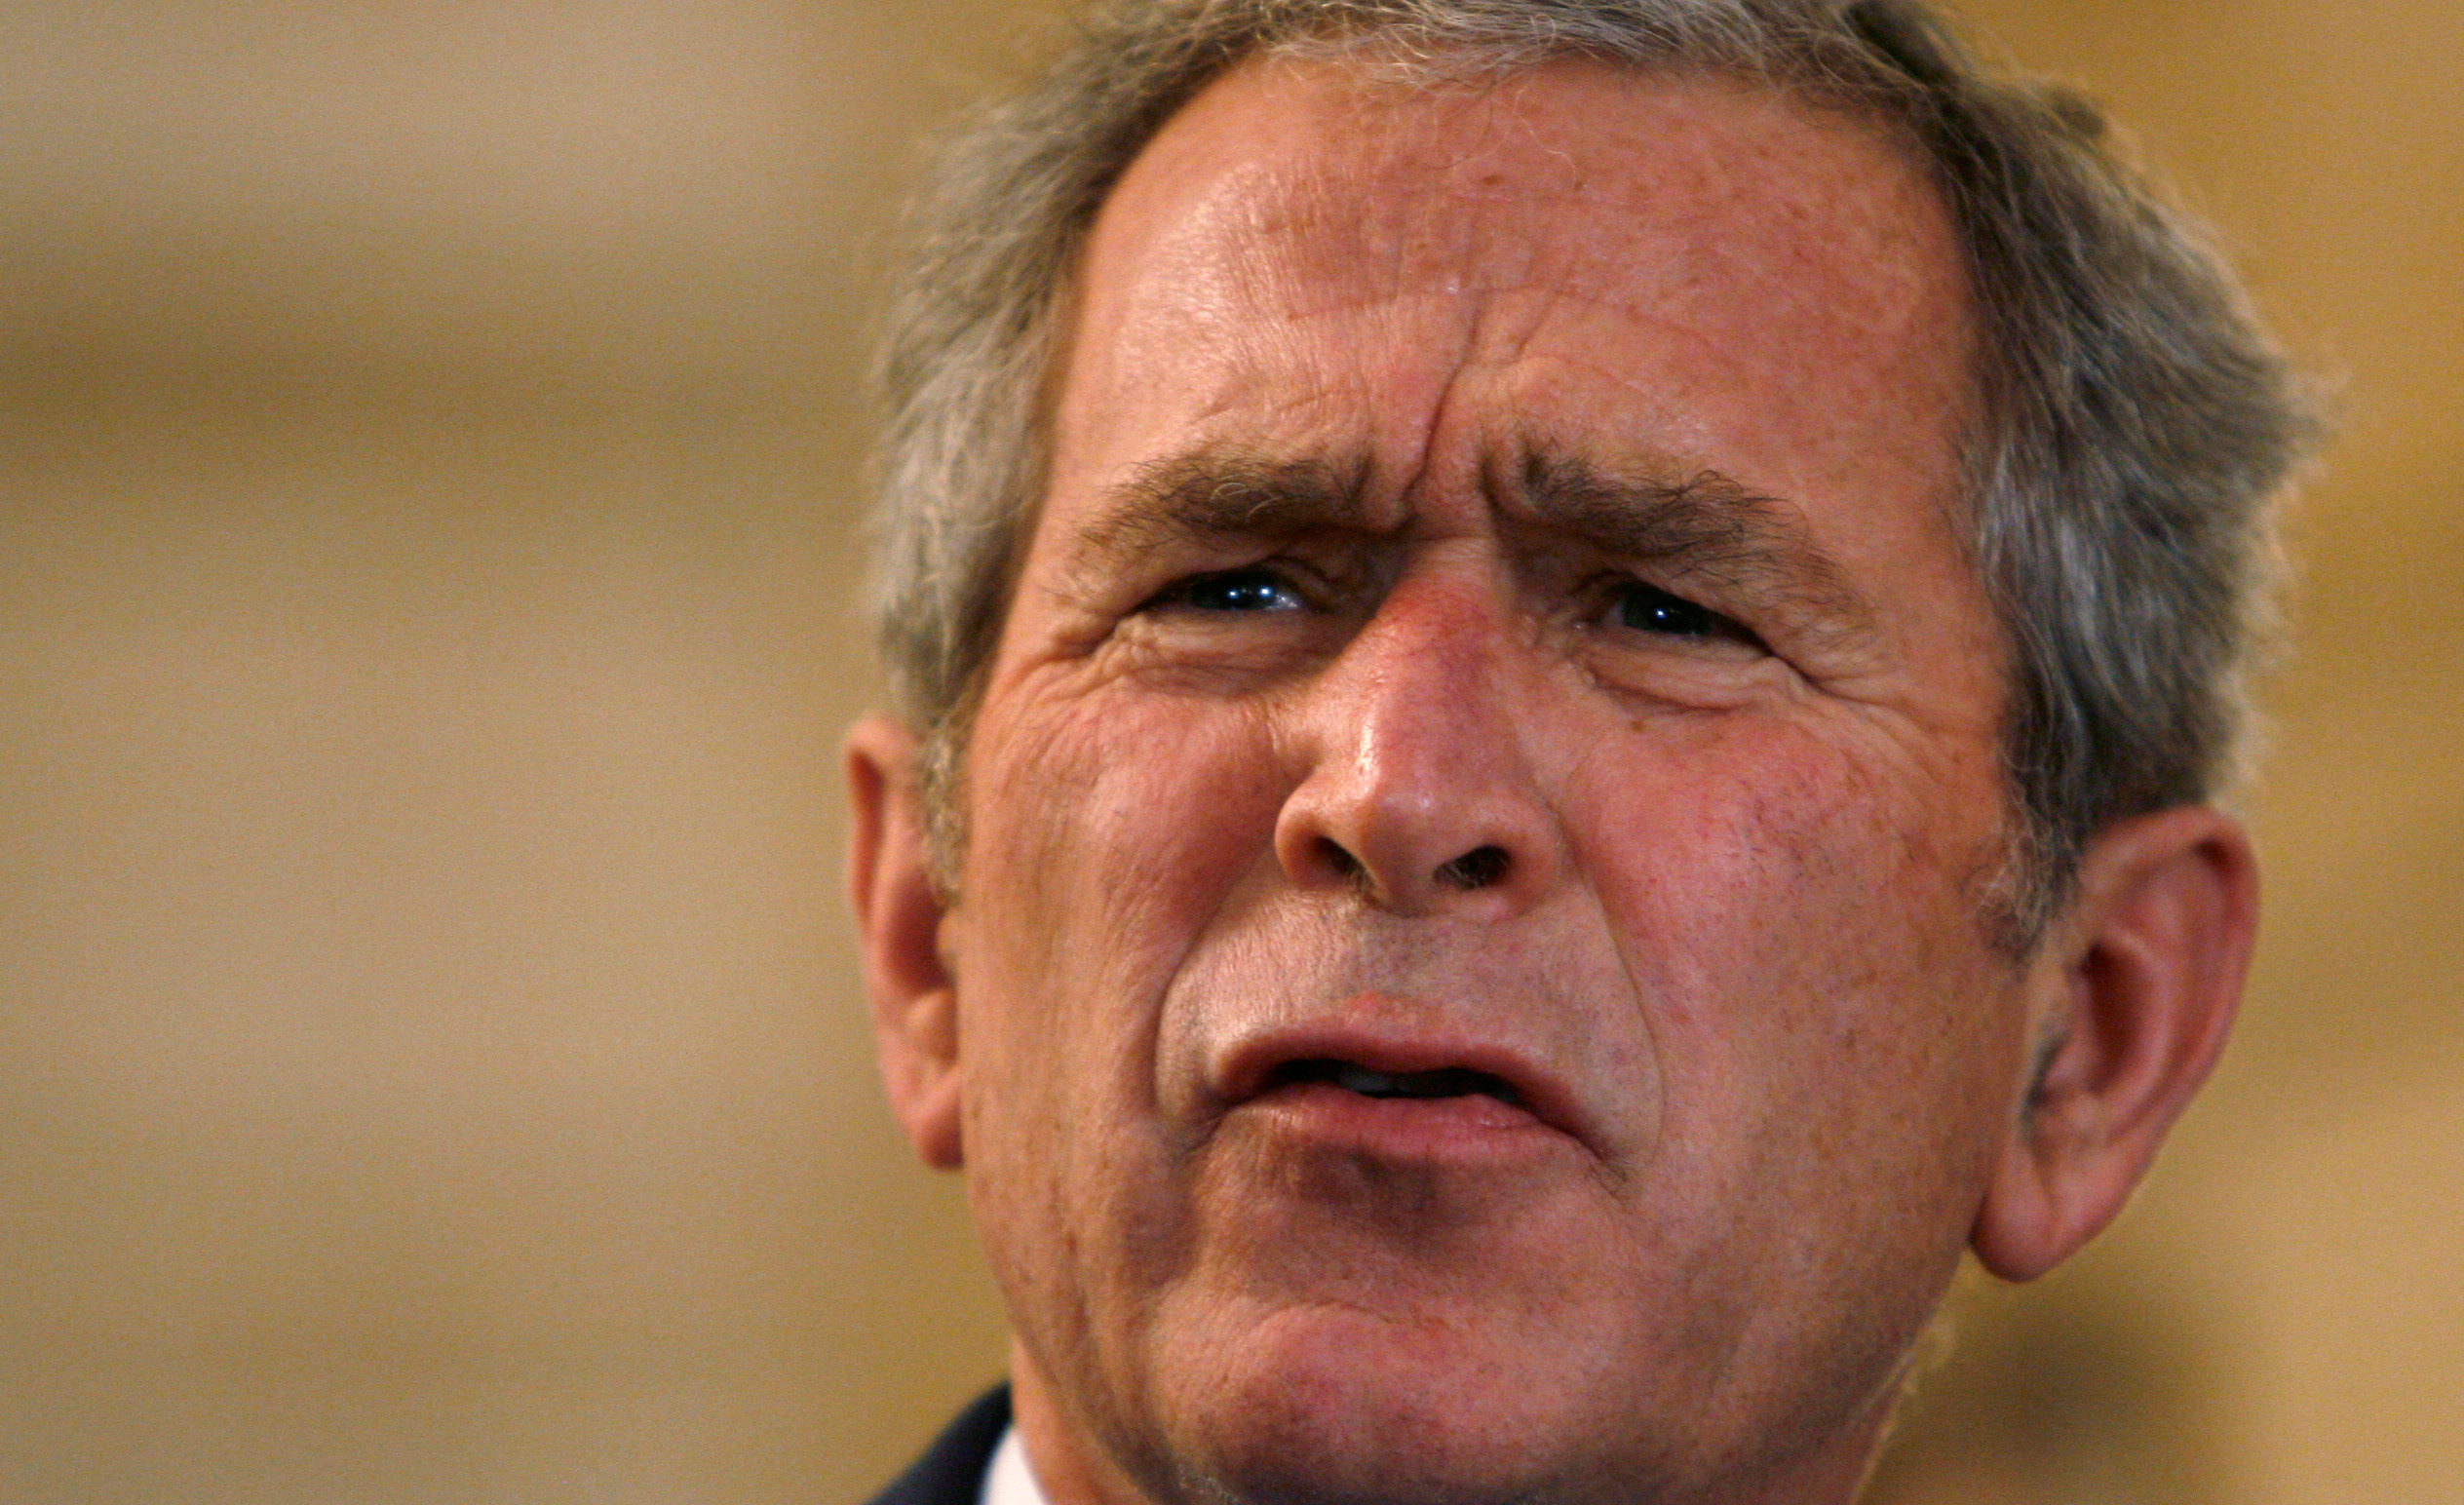 President  Bush reacts to a question after a man threw a shoe at him in Iraq